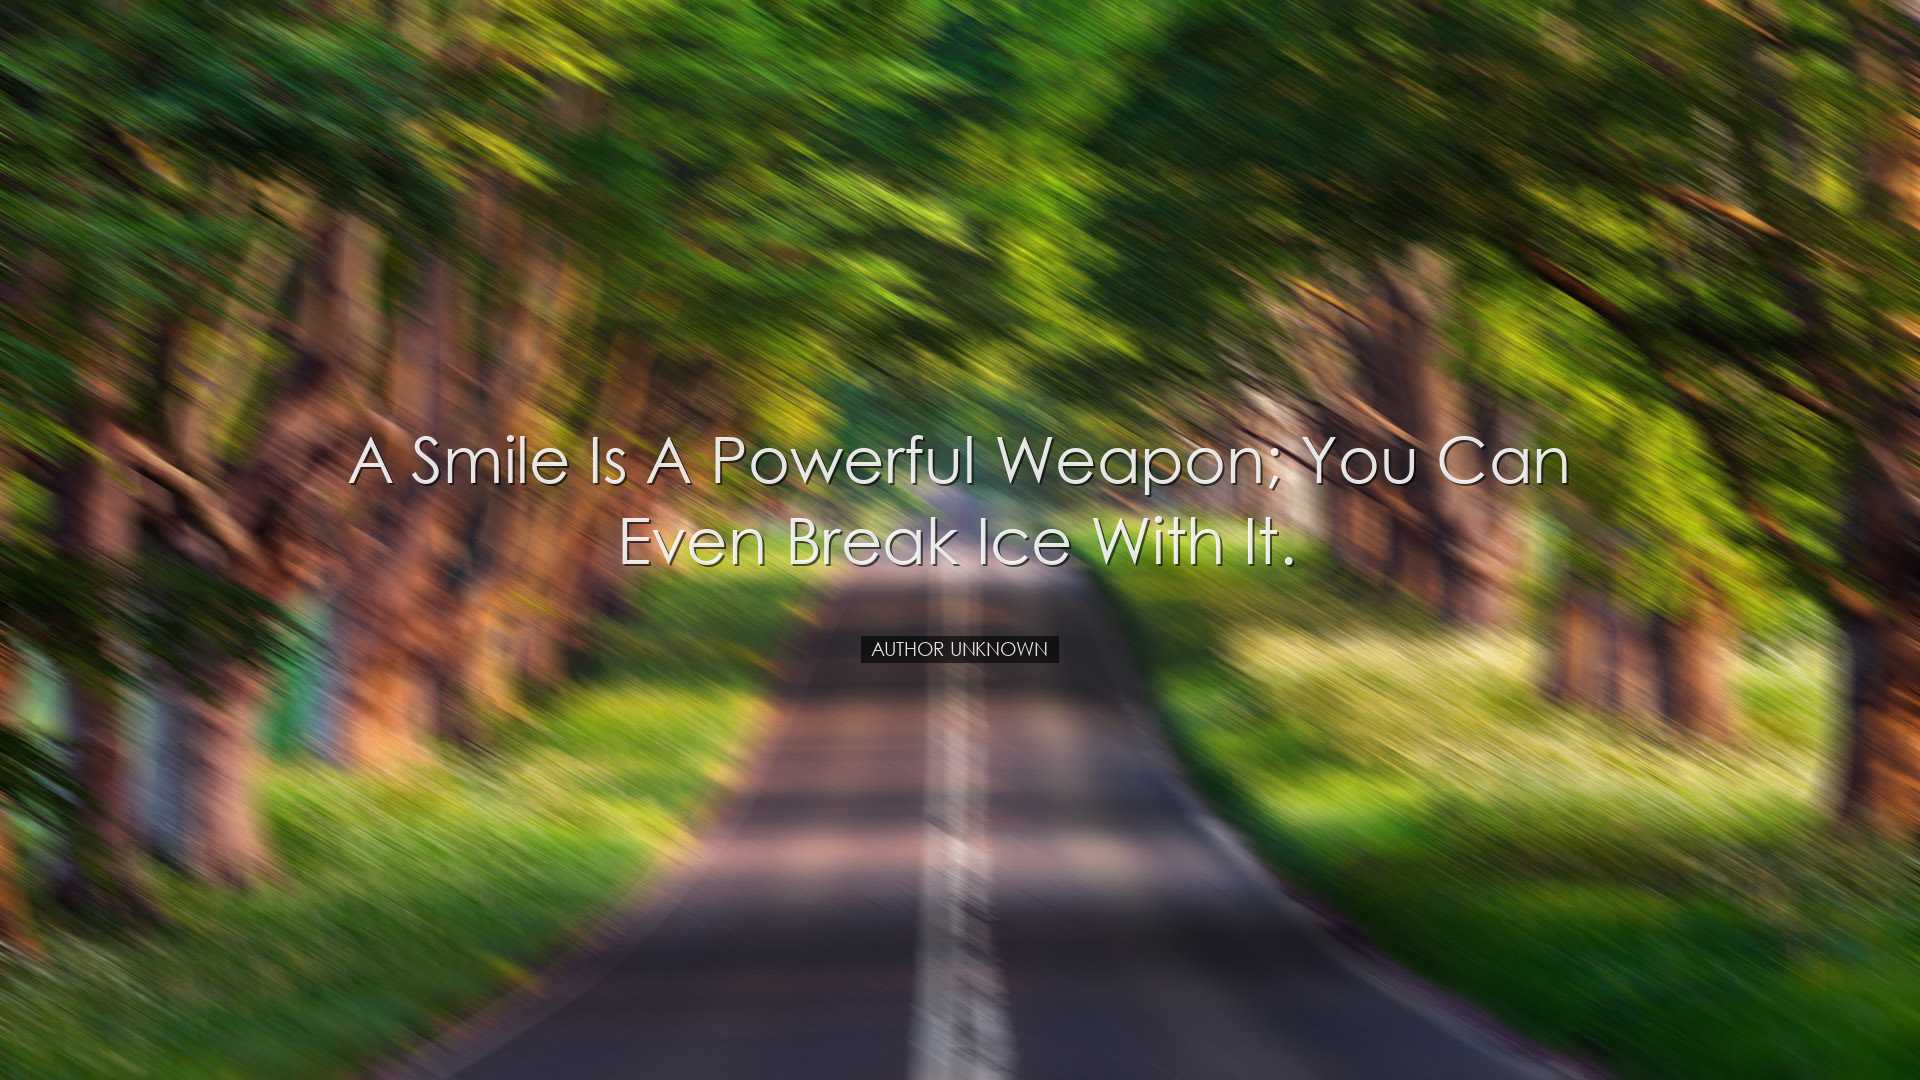 A smile is a powerful weapon; you can even break ice with it. - Au